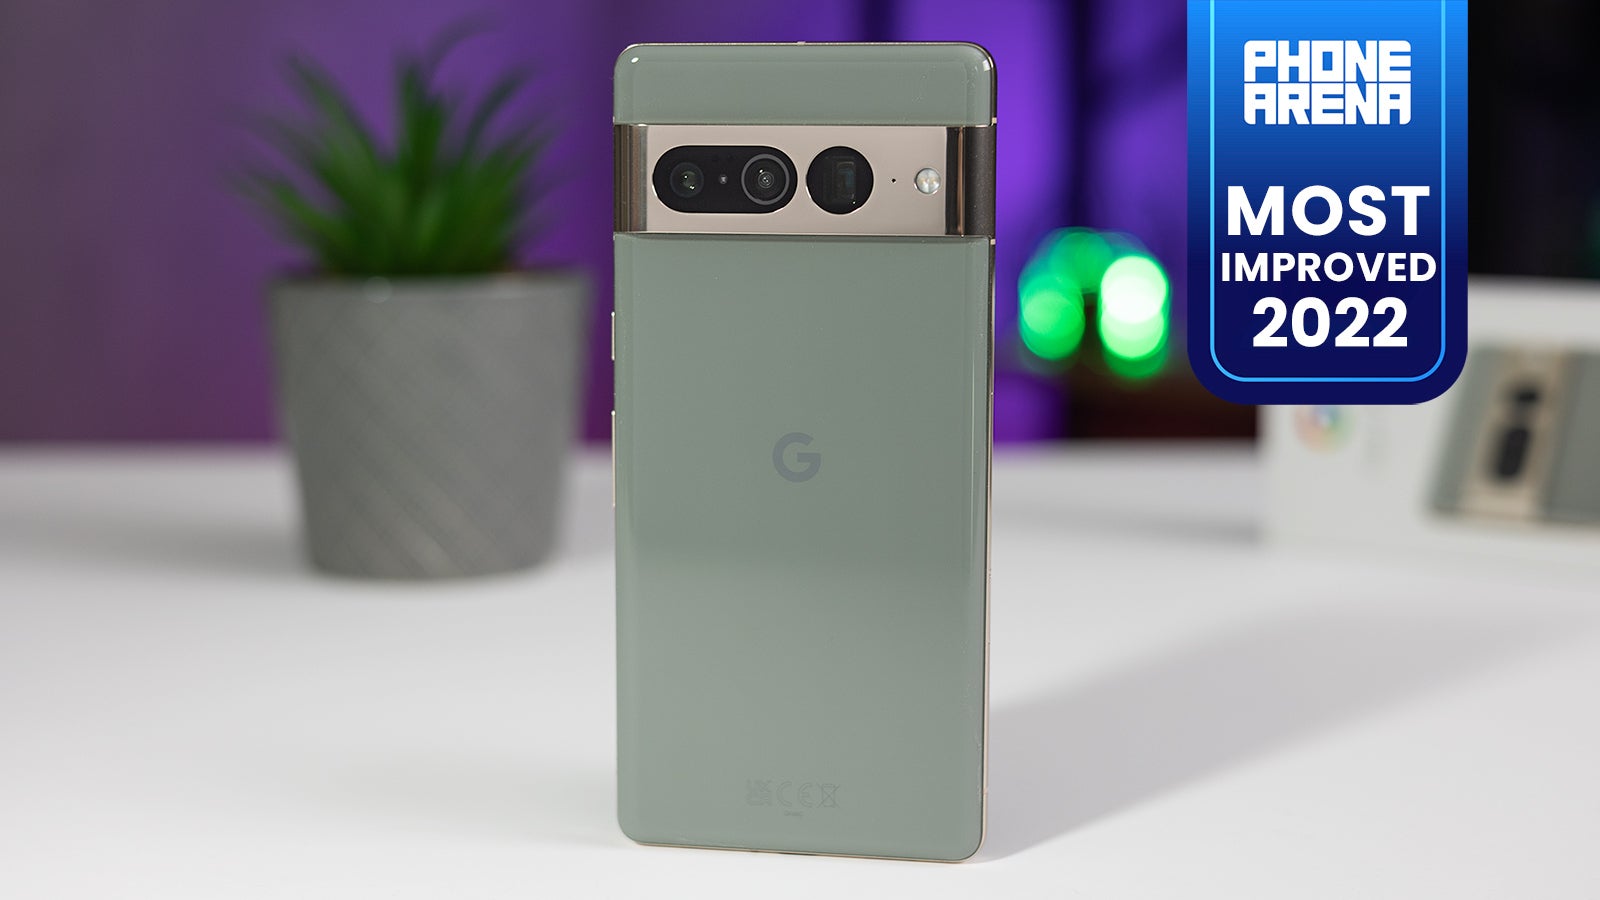 (Image Credit - PhoneArena) The one phone that made the biggest leap in terms of quality was the Google Pixel 7 Pro - PhoneArena Awards 2022: Best Phones of the Year!